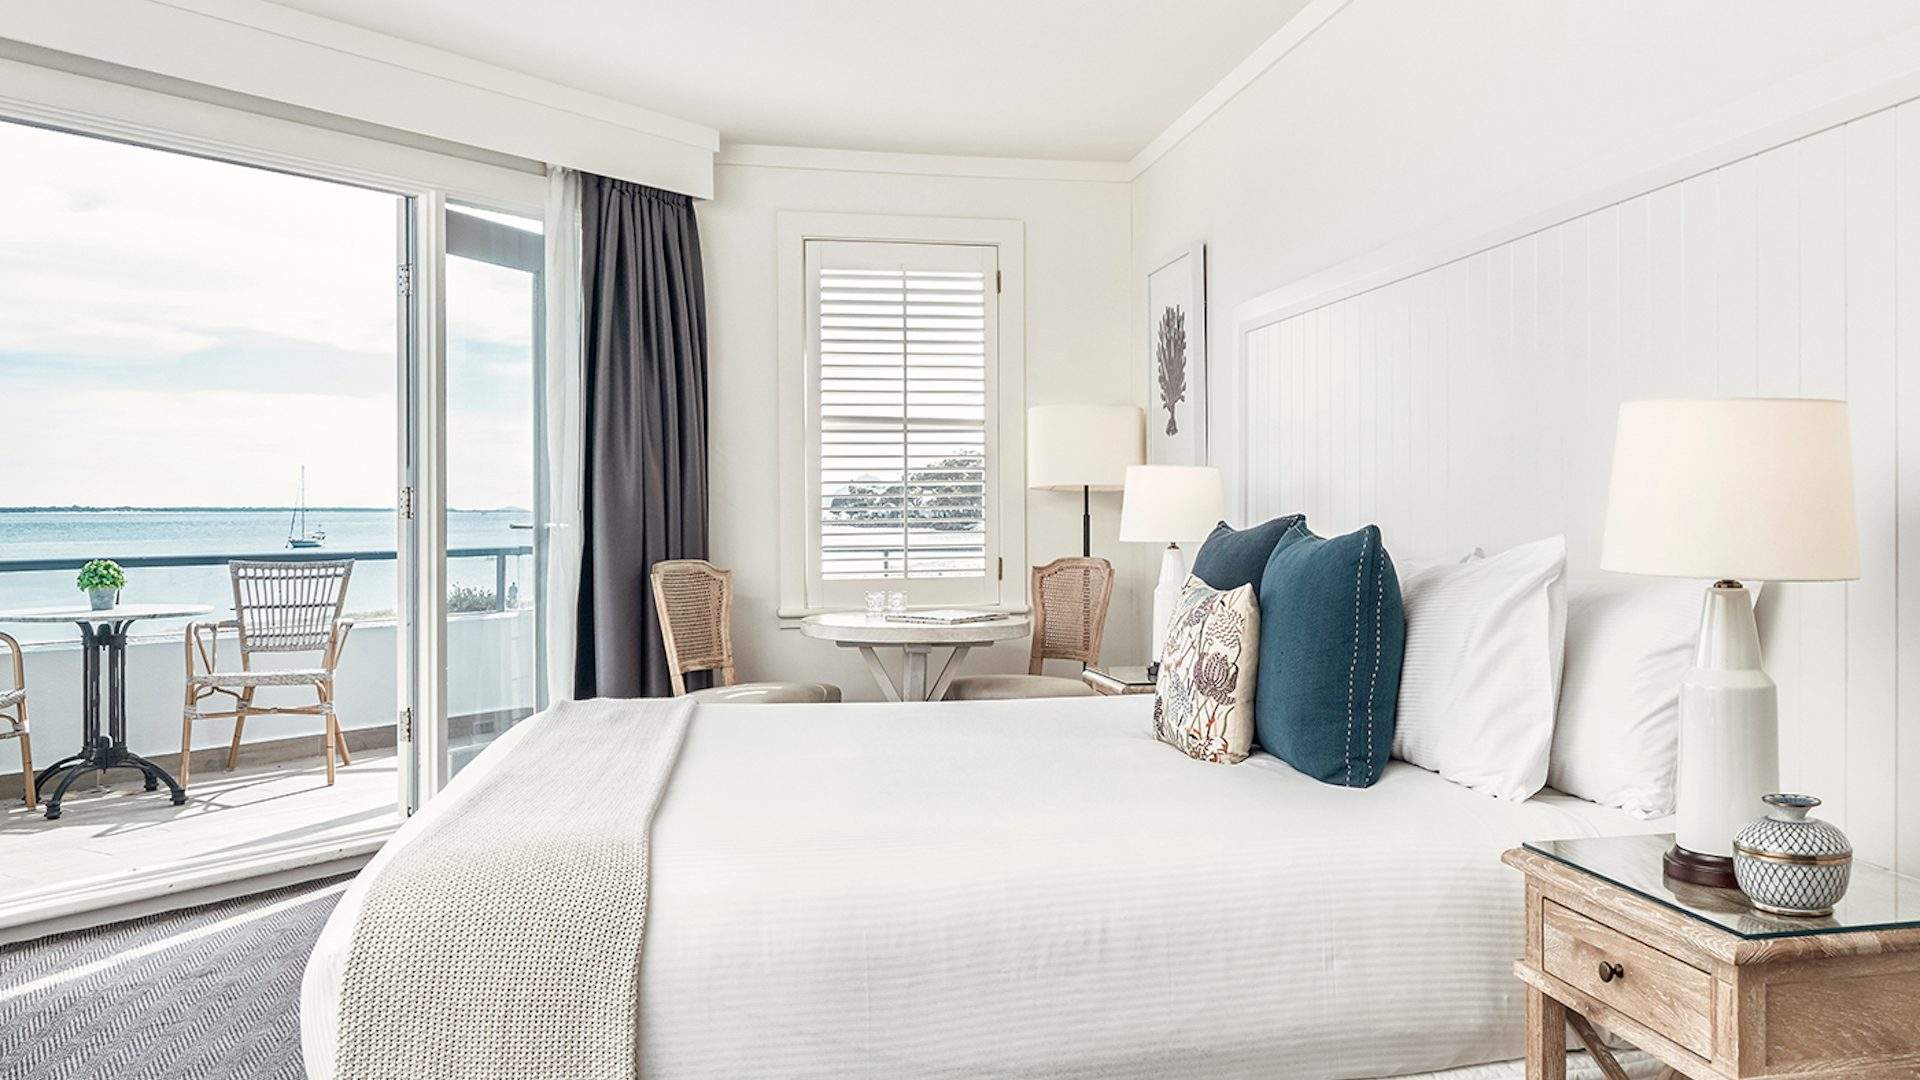 We're Giving Away a Night at a Port Stephens Hamptons-Chic Hotel So You Can Max Out on Seafood and Sea Views